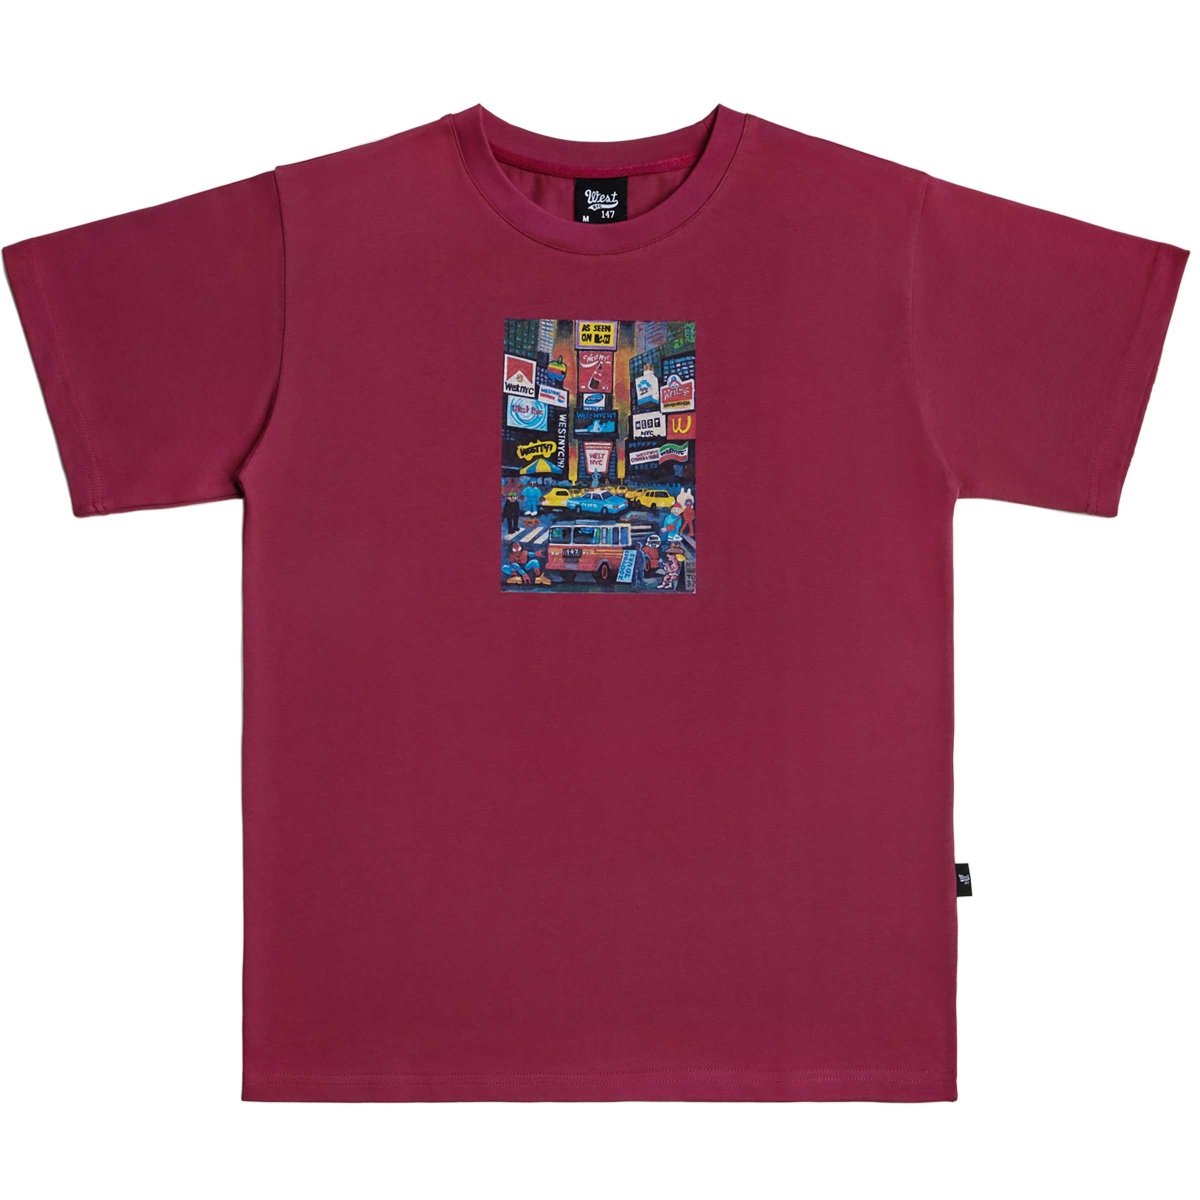 West NYC Times Square Tee Shirt Plum - 10044334 - West NYC